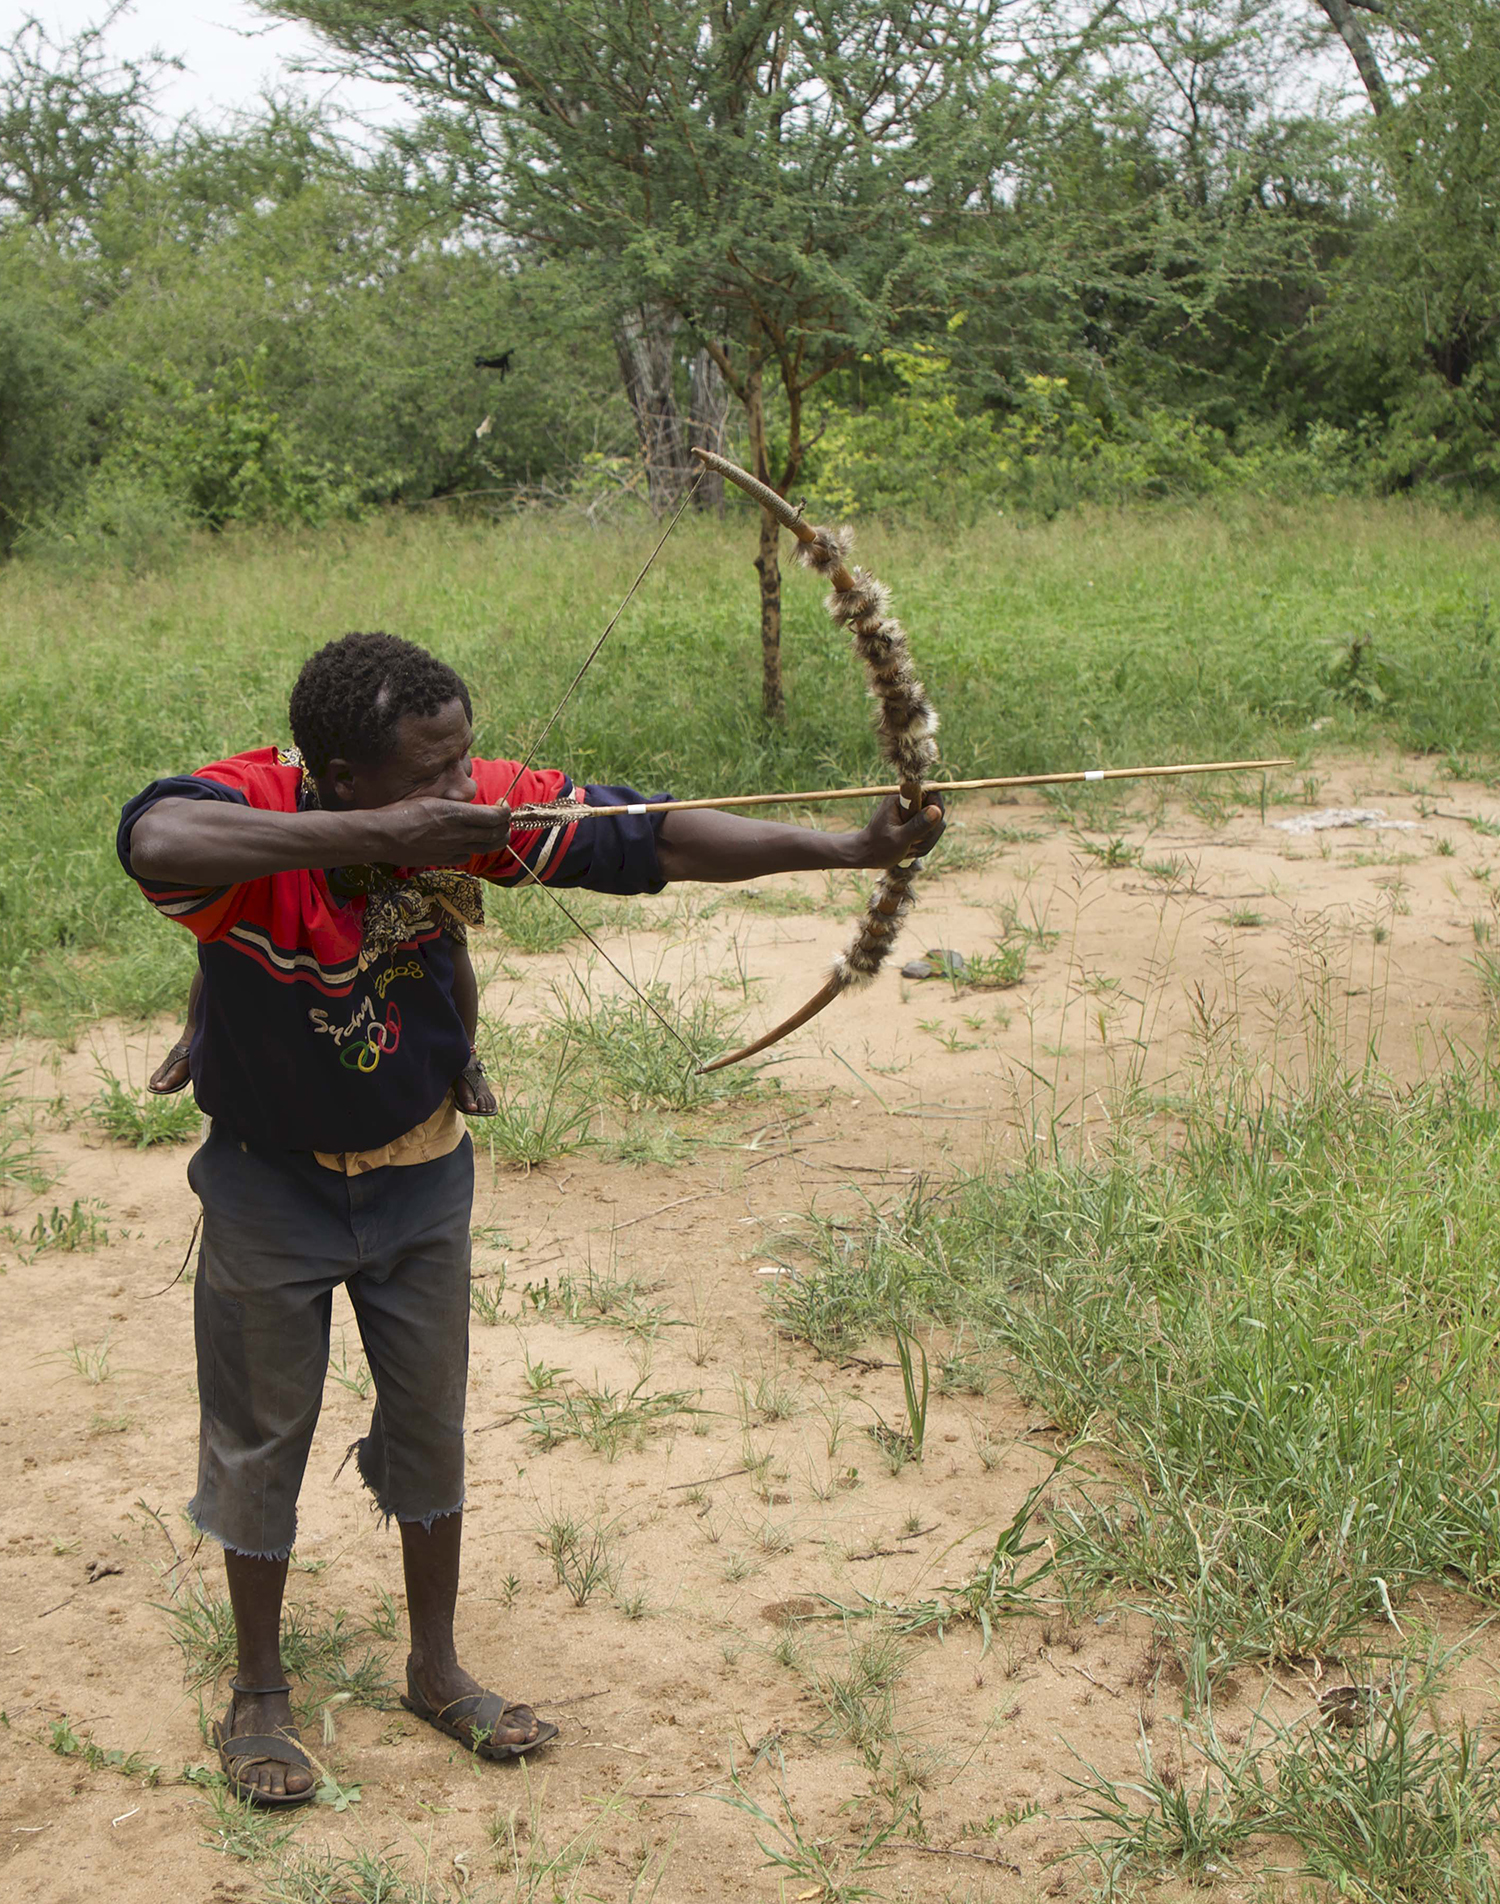 Hadza man with bow